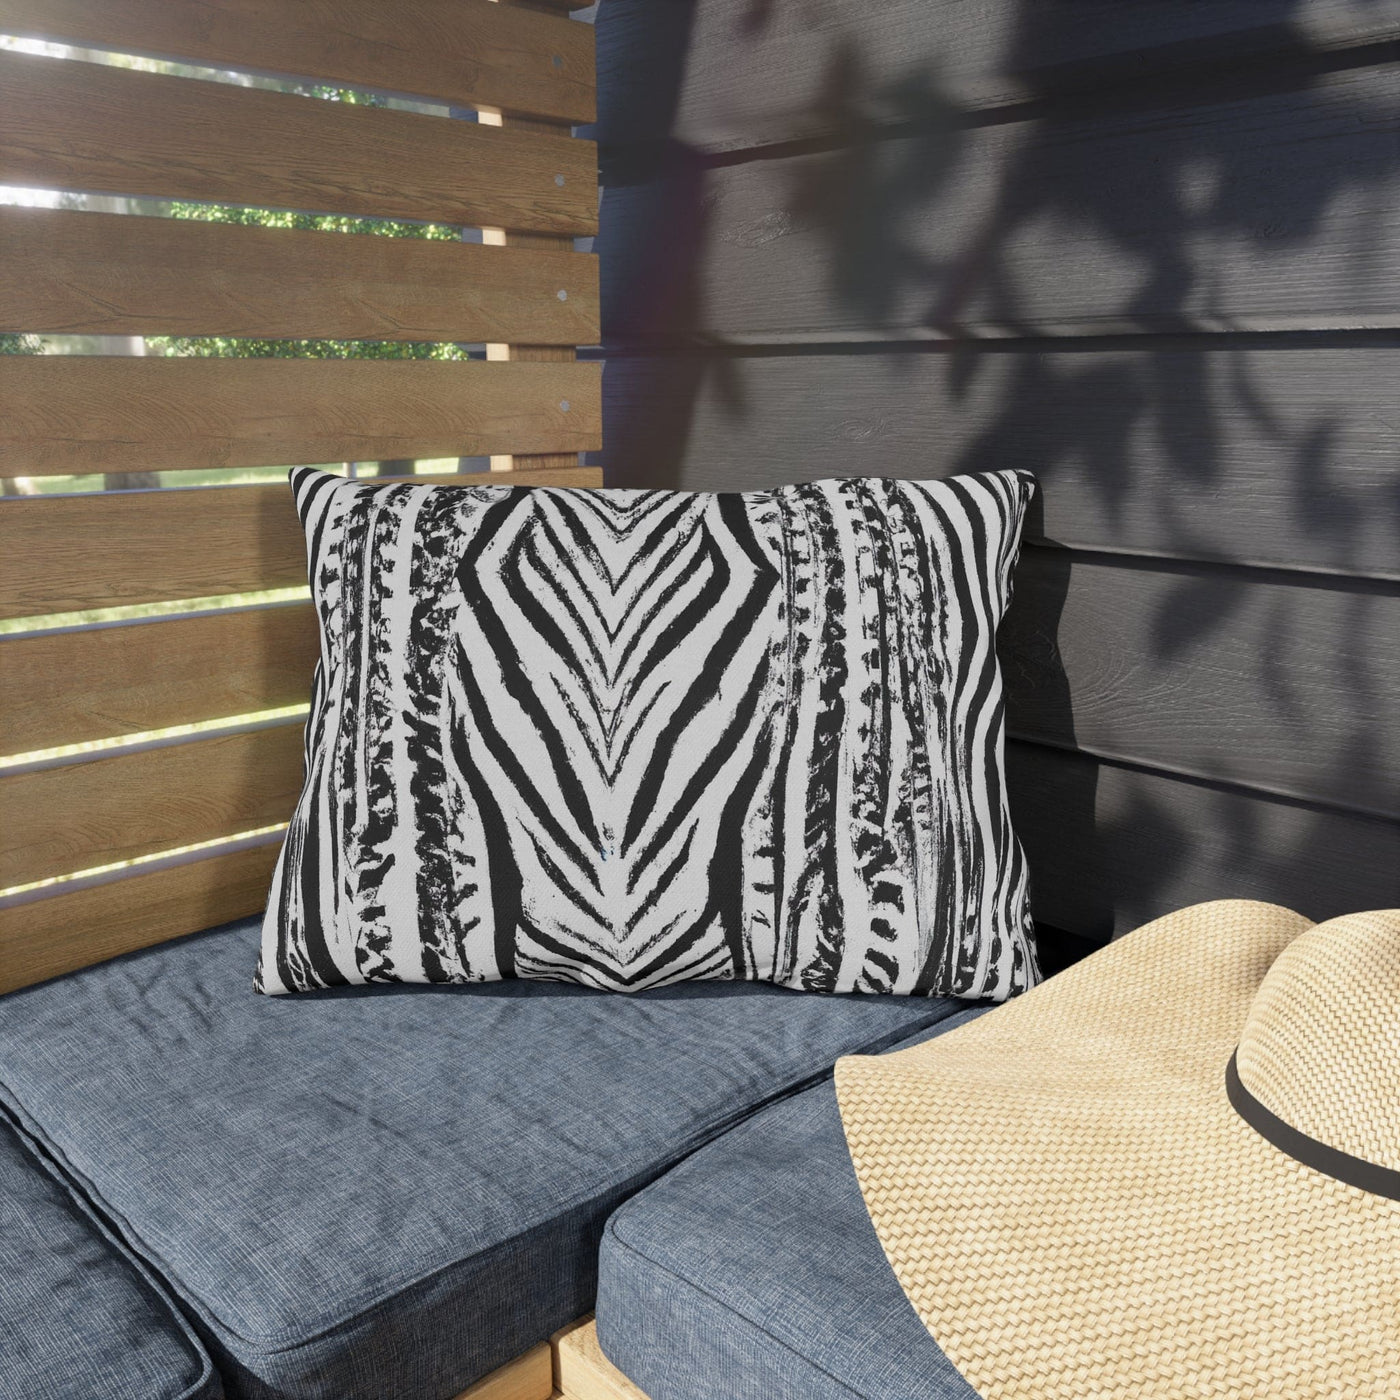 Decorative Outdoor Pillows With Zipper - Set Of 2 Native Black And White